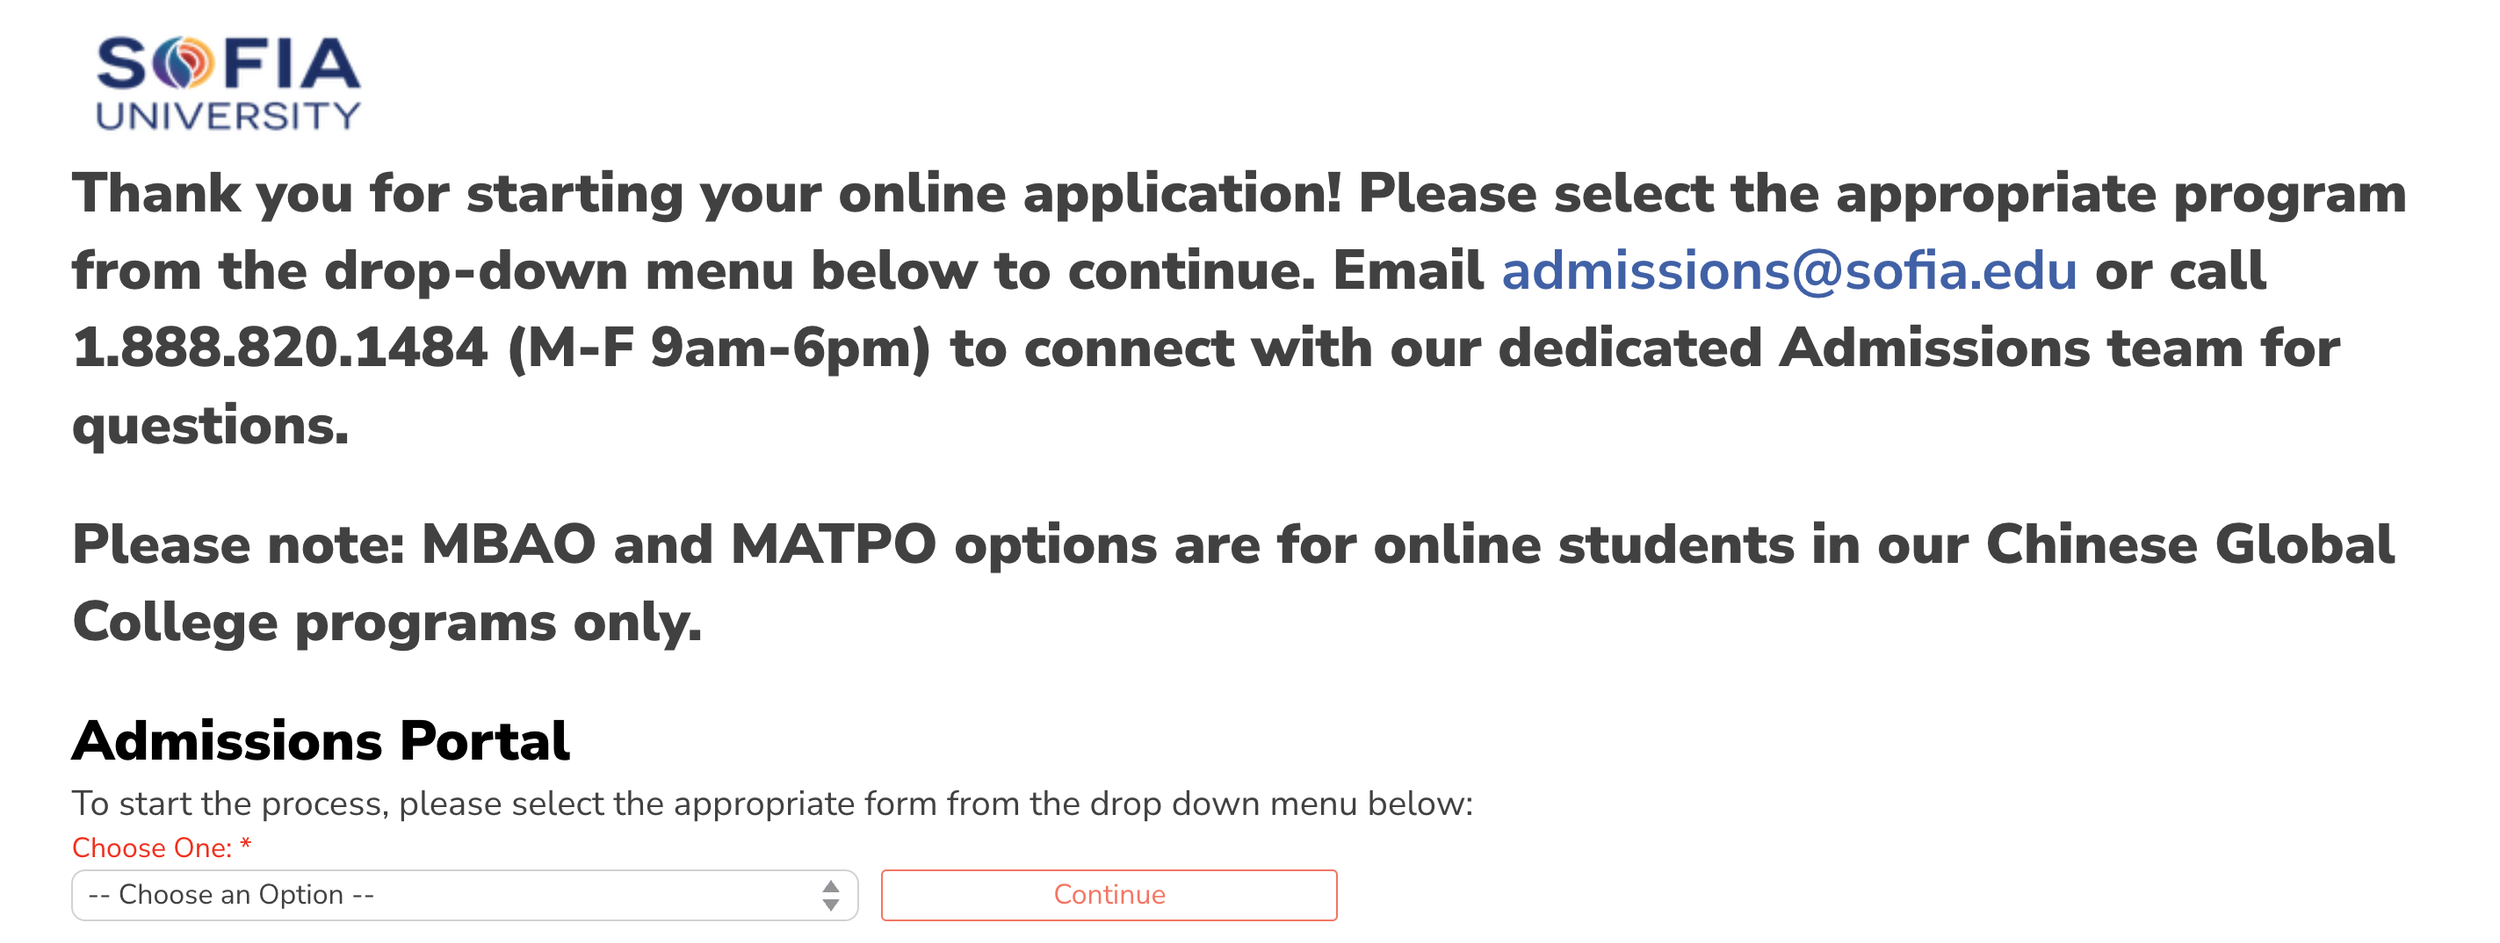 Step 1: Set up your Application Account